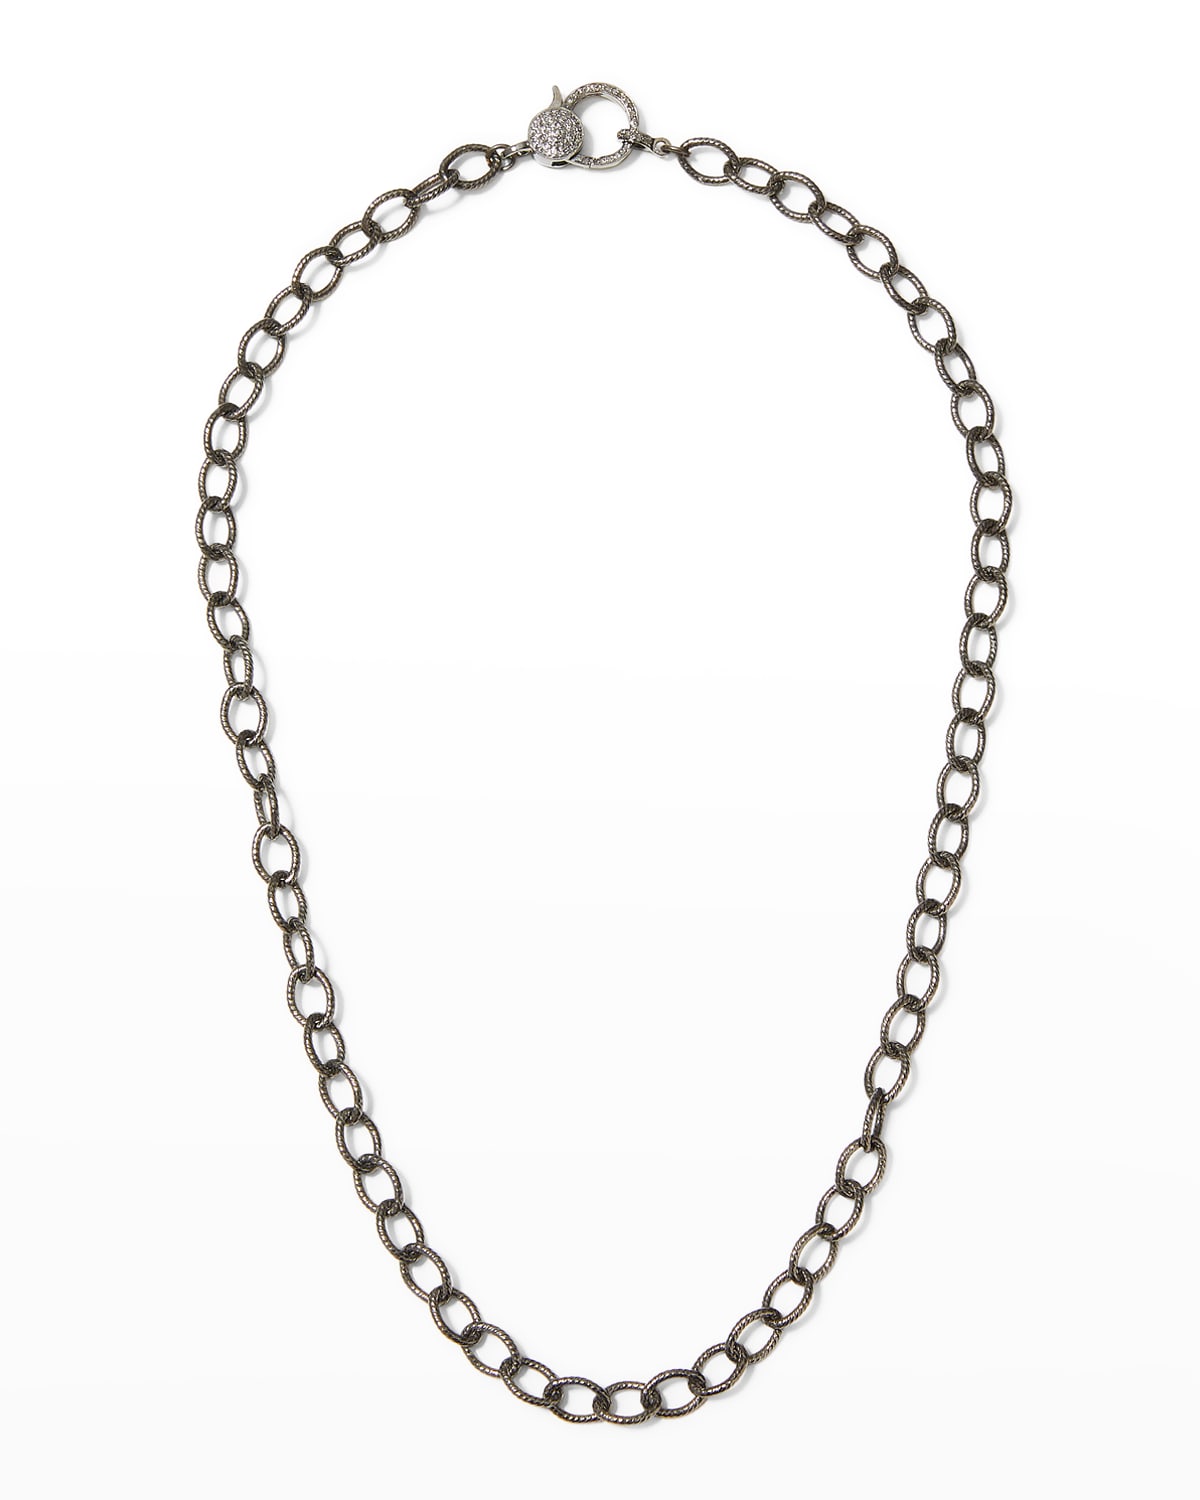 Margo Morrison Textured Link Chain with Diamond Clasp